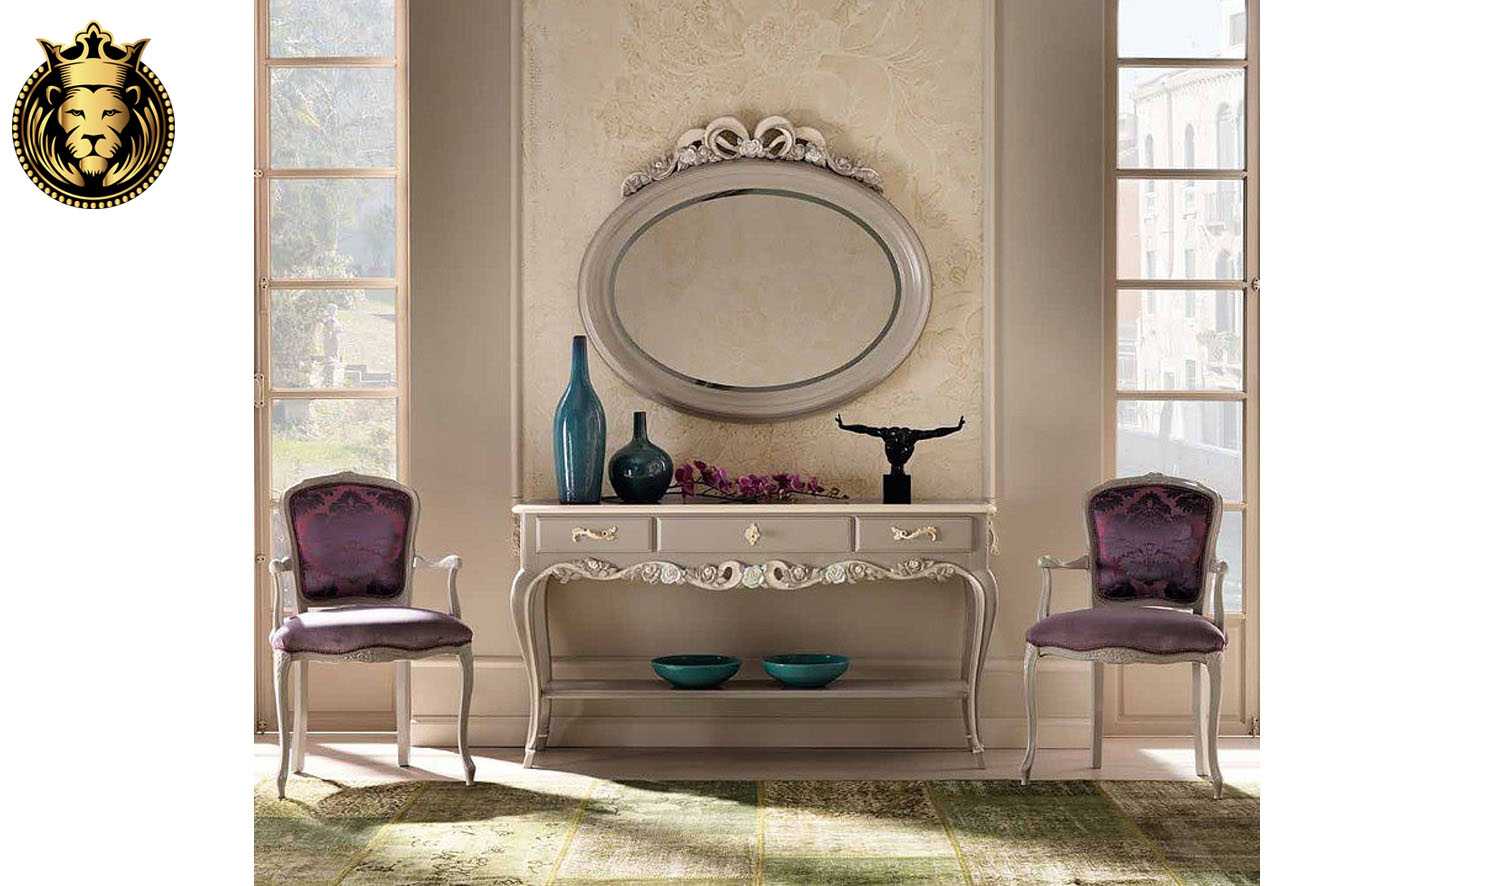 luxury-dressing-table-&-mirror-frame---dressing-unit-or-vanity-table-in-wood-carving-design---carved-in-india---shop-online---brand-royalzig-luxury-furniture.